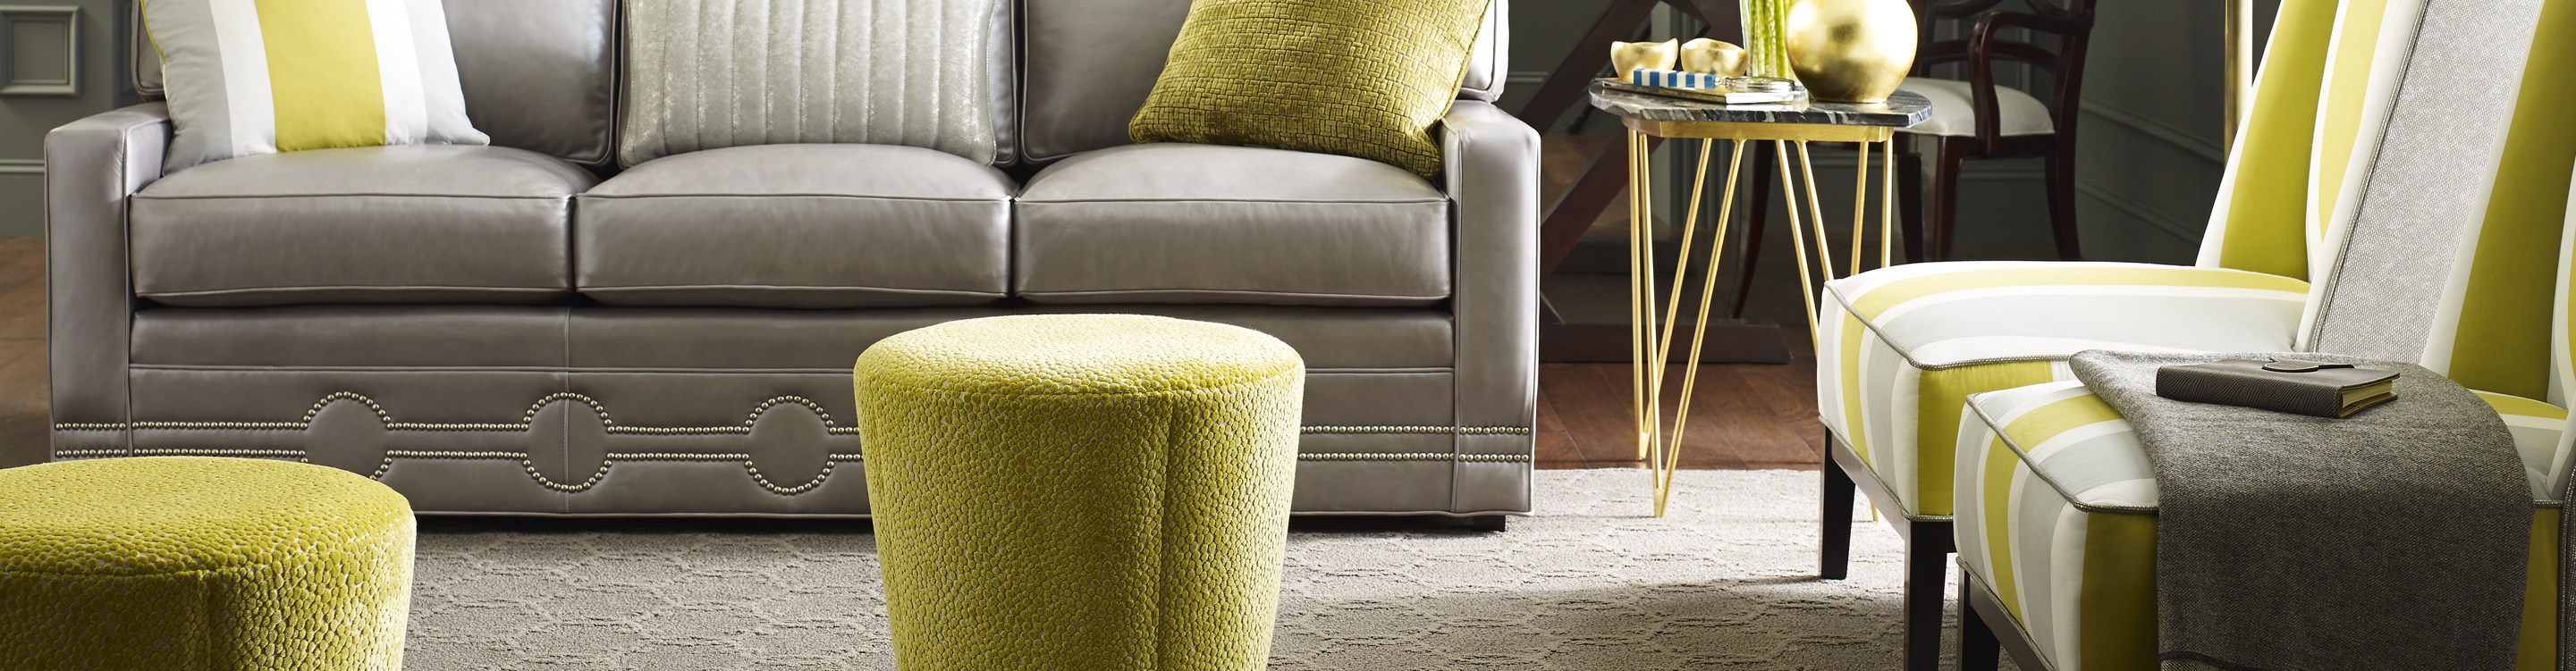 Neutral light brown patterned area rug in living area with gray and lime green armchairs and gray sofa